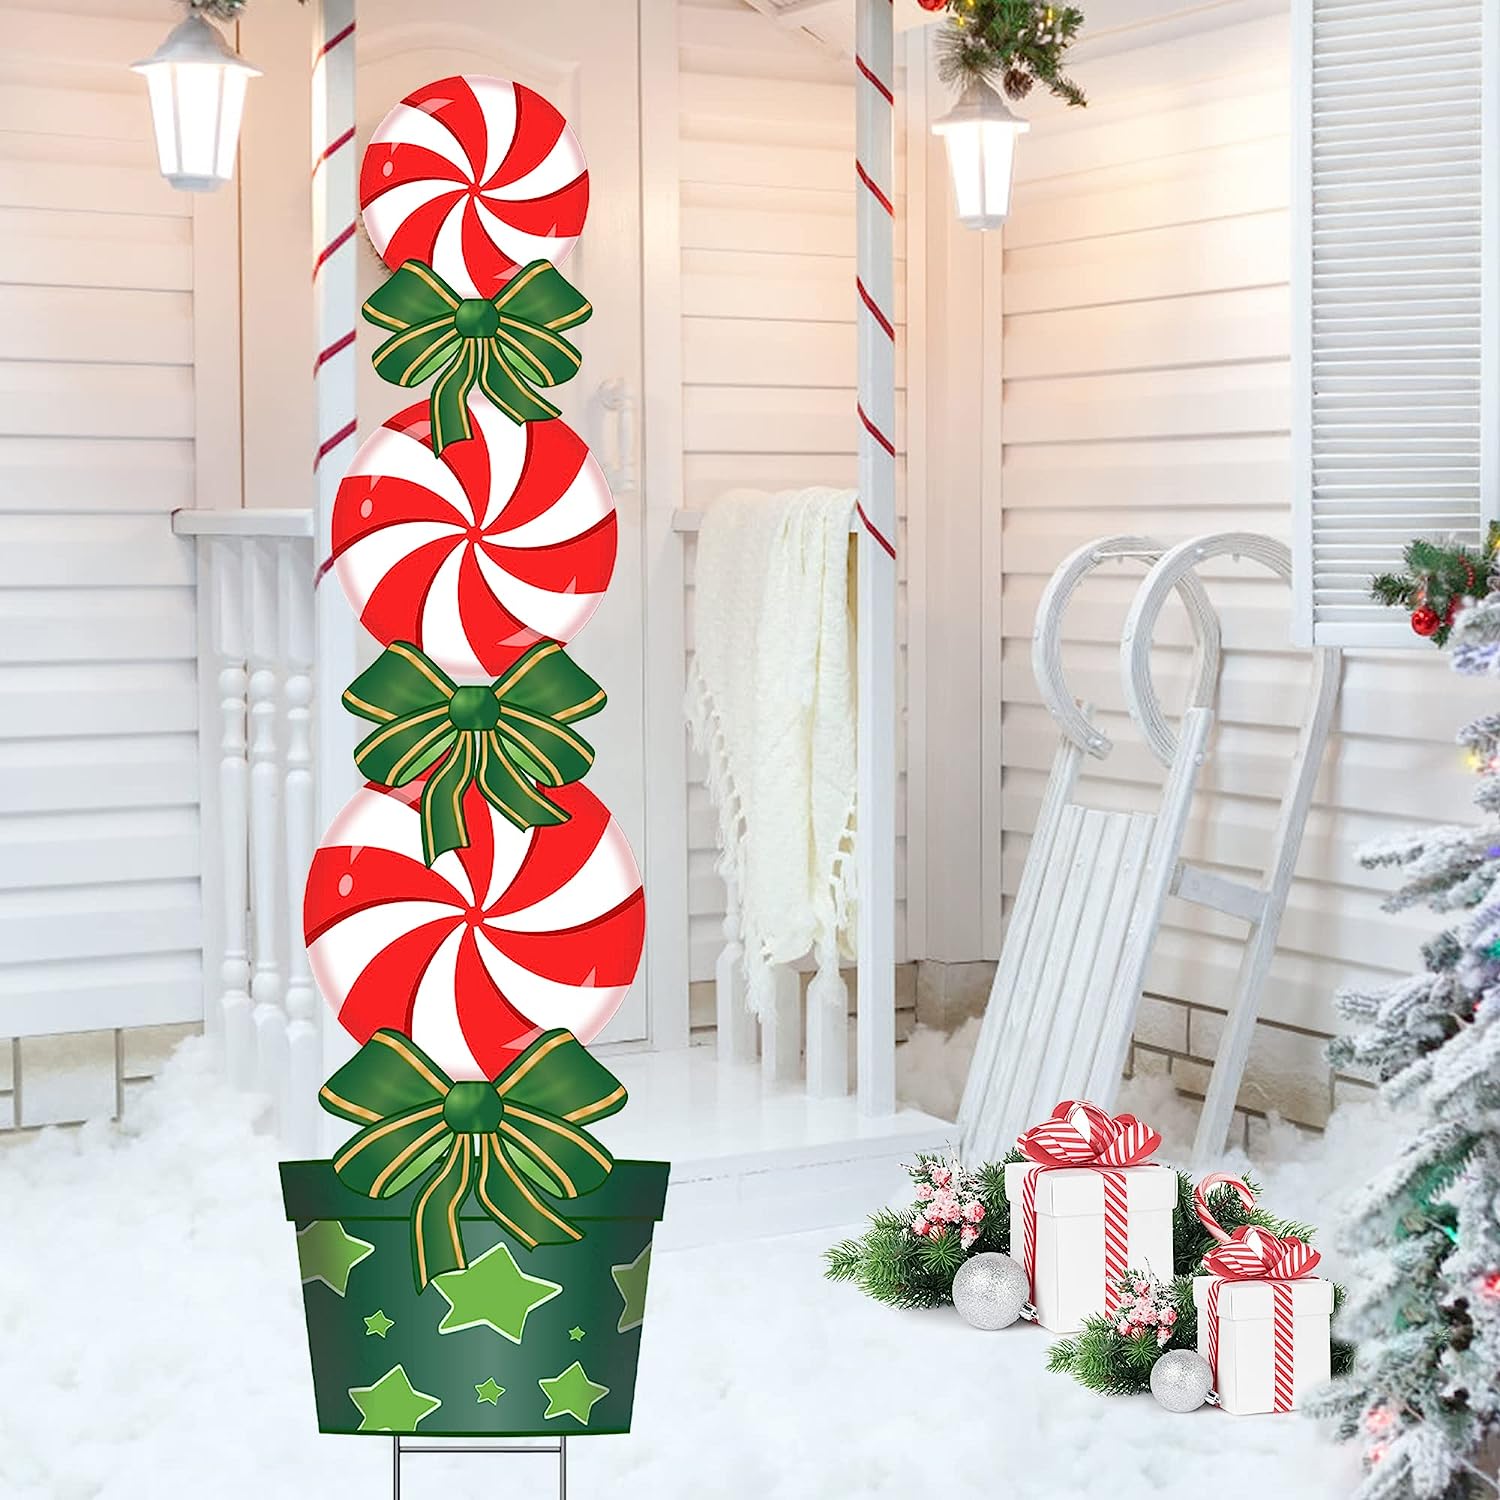 Christmas Candy Cane Yard Signs Garden Stake The Holiday Aisle